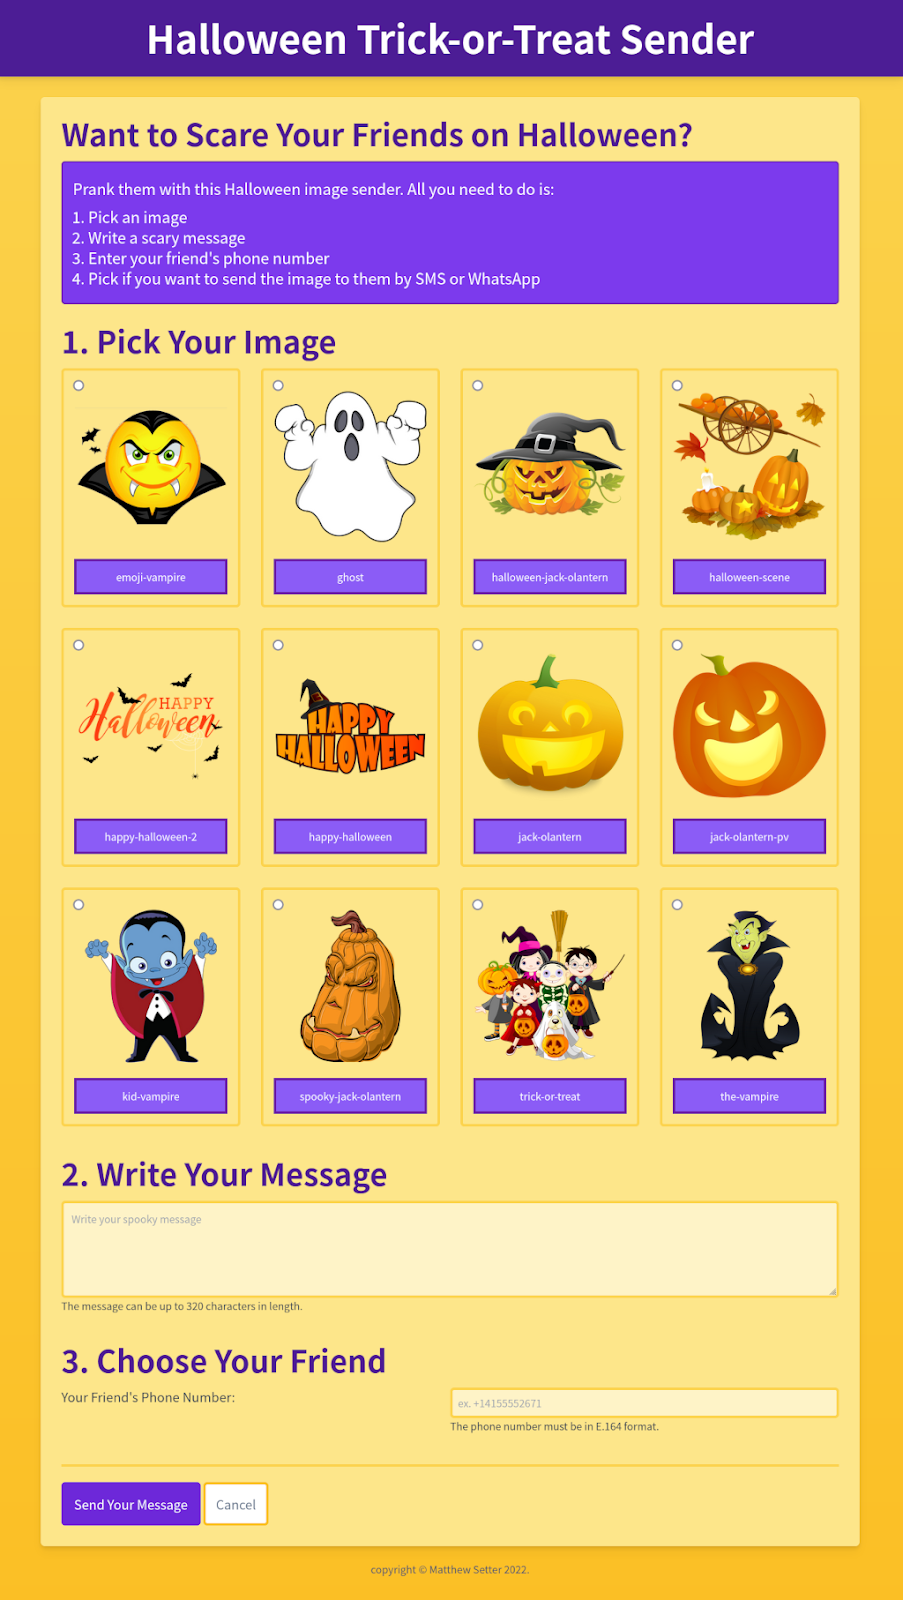 The complete Halloween-themed web app